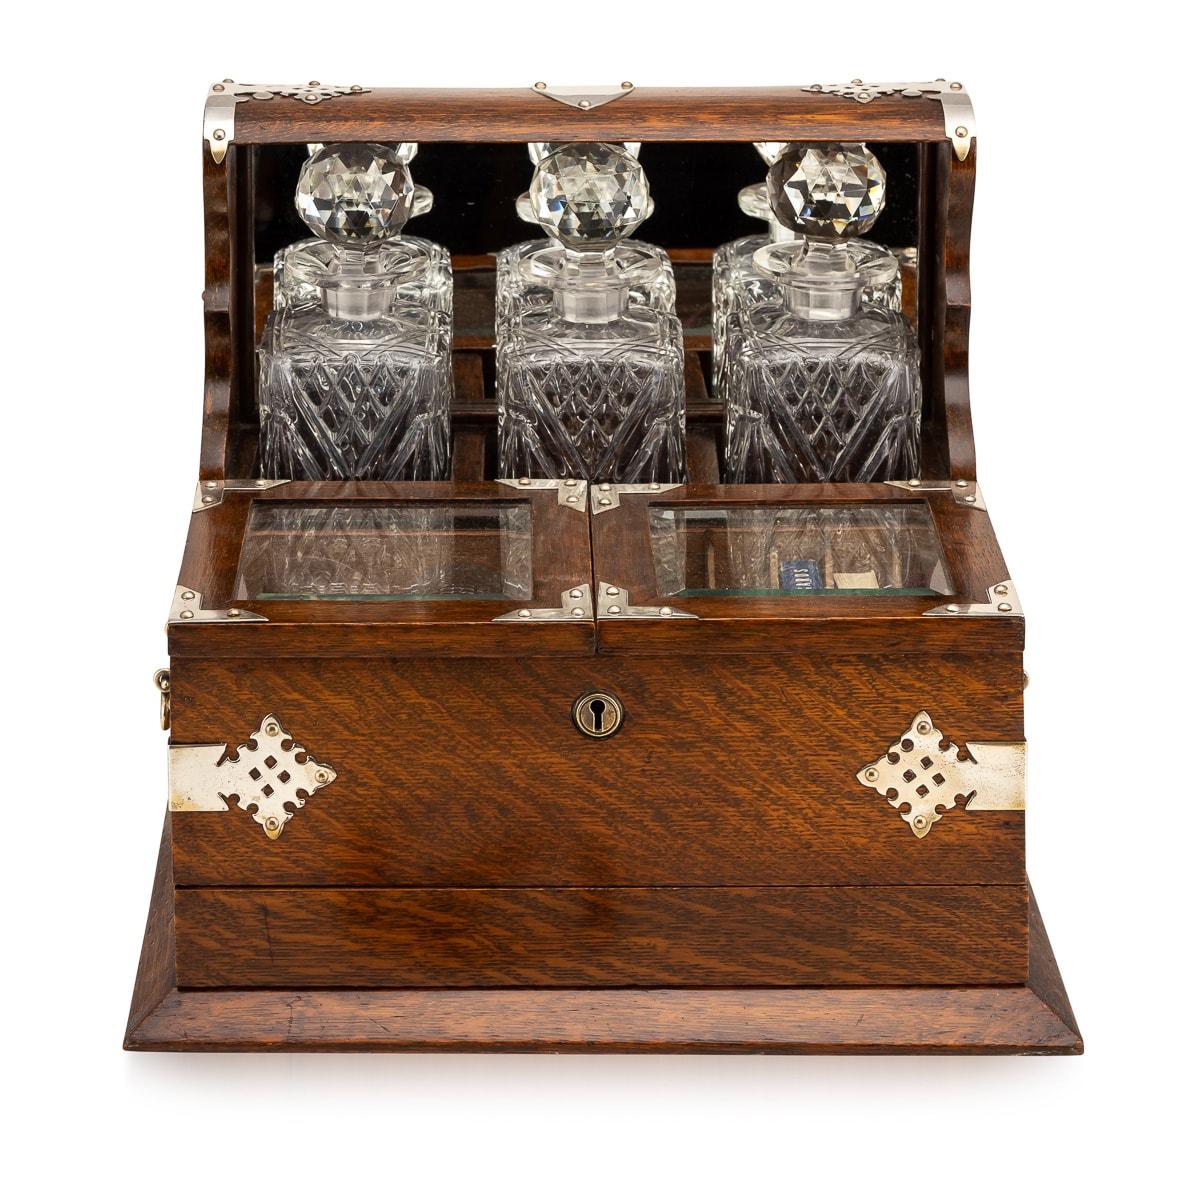 Antique late-19th Century Victorian silver plated mounted on solid oak tantilus, with a humidor & games compendium, the interior comprising three cut crystal decanters with stoppers, three glasses, a secret hidden draw, which opens by first opening